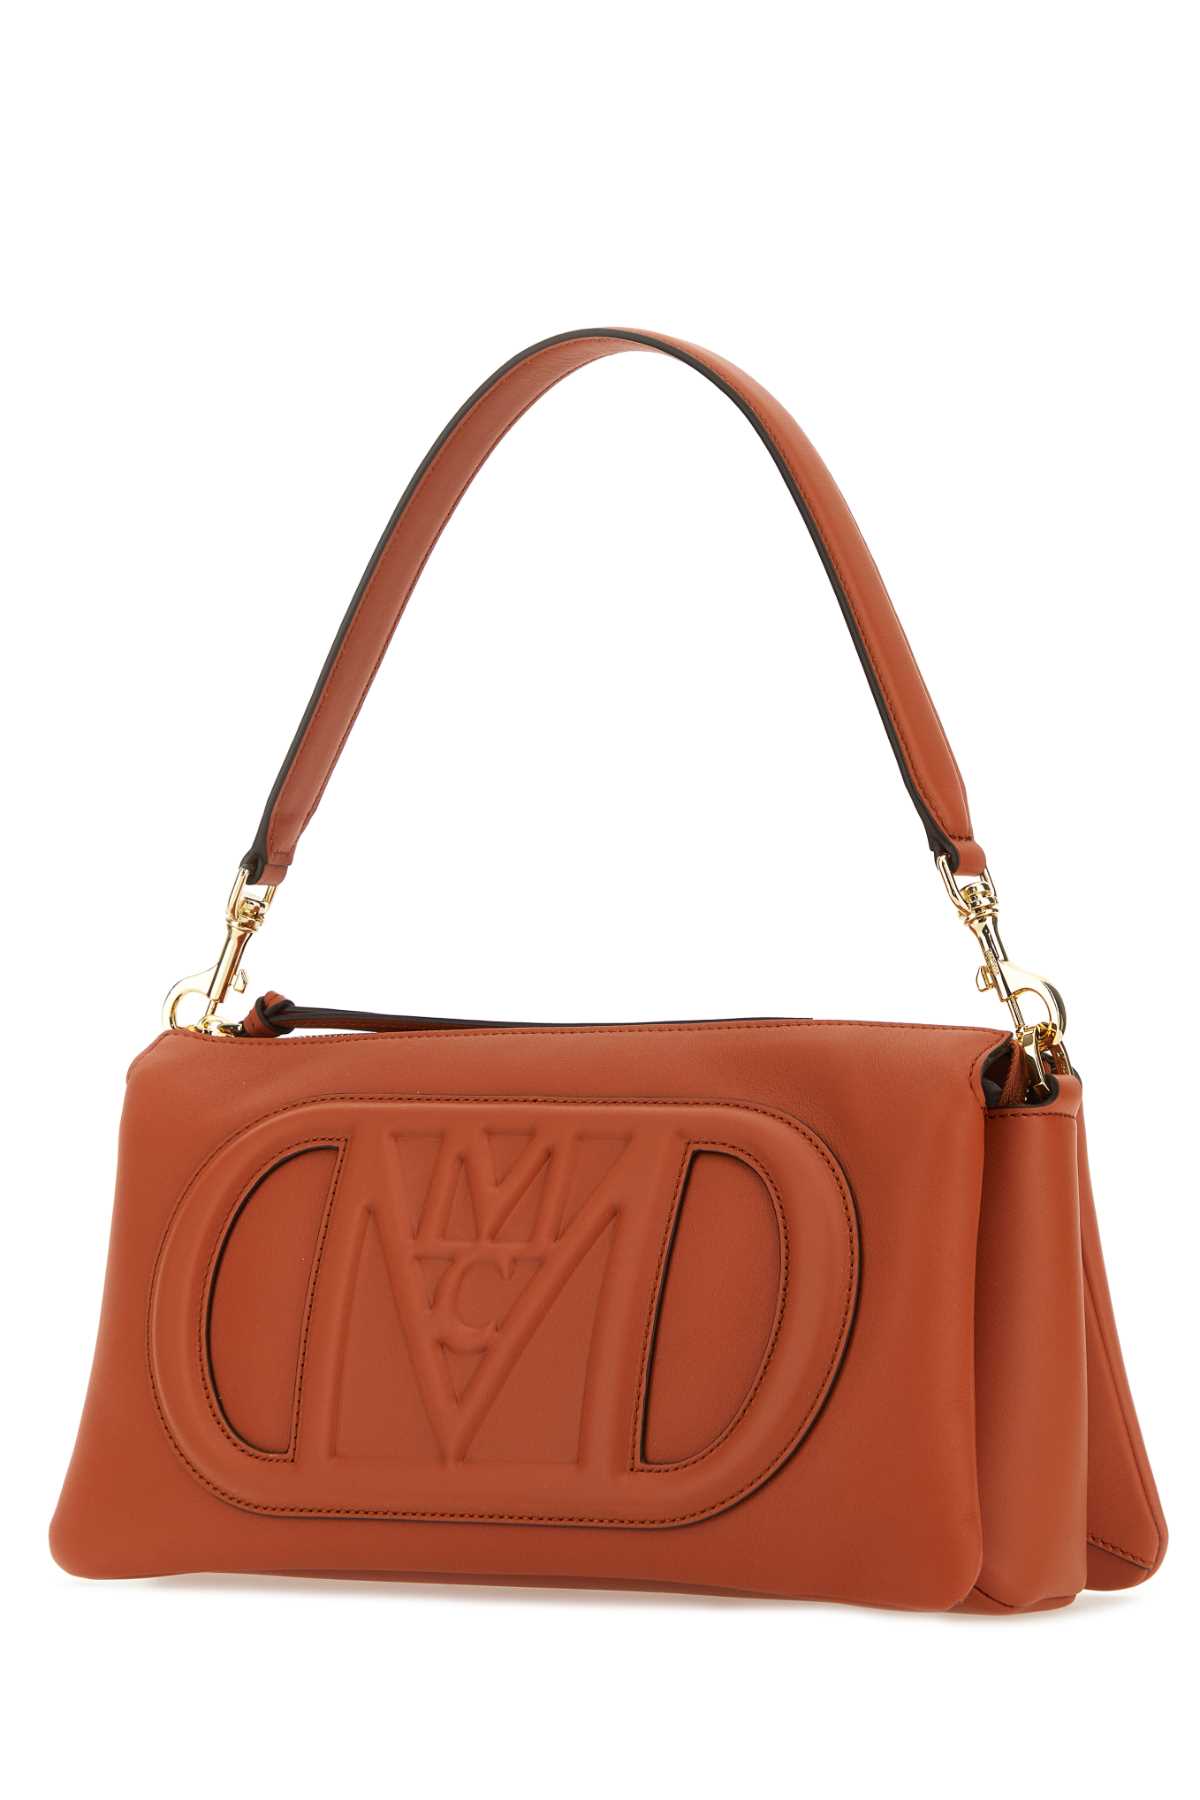 Mcm Brick Leather Mode Travia Small Shoulder Bag In Bombay Brown